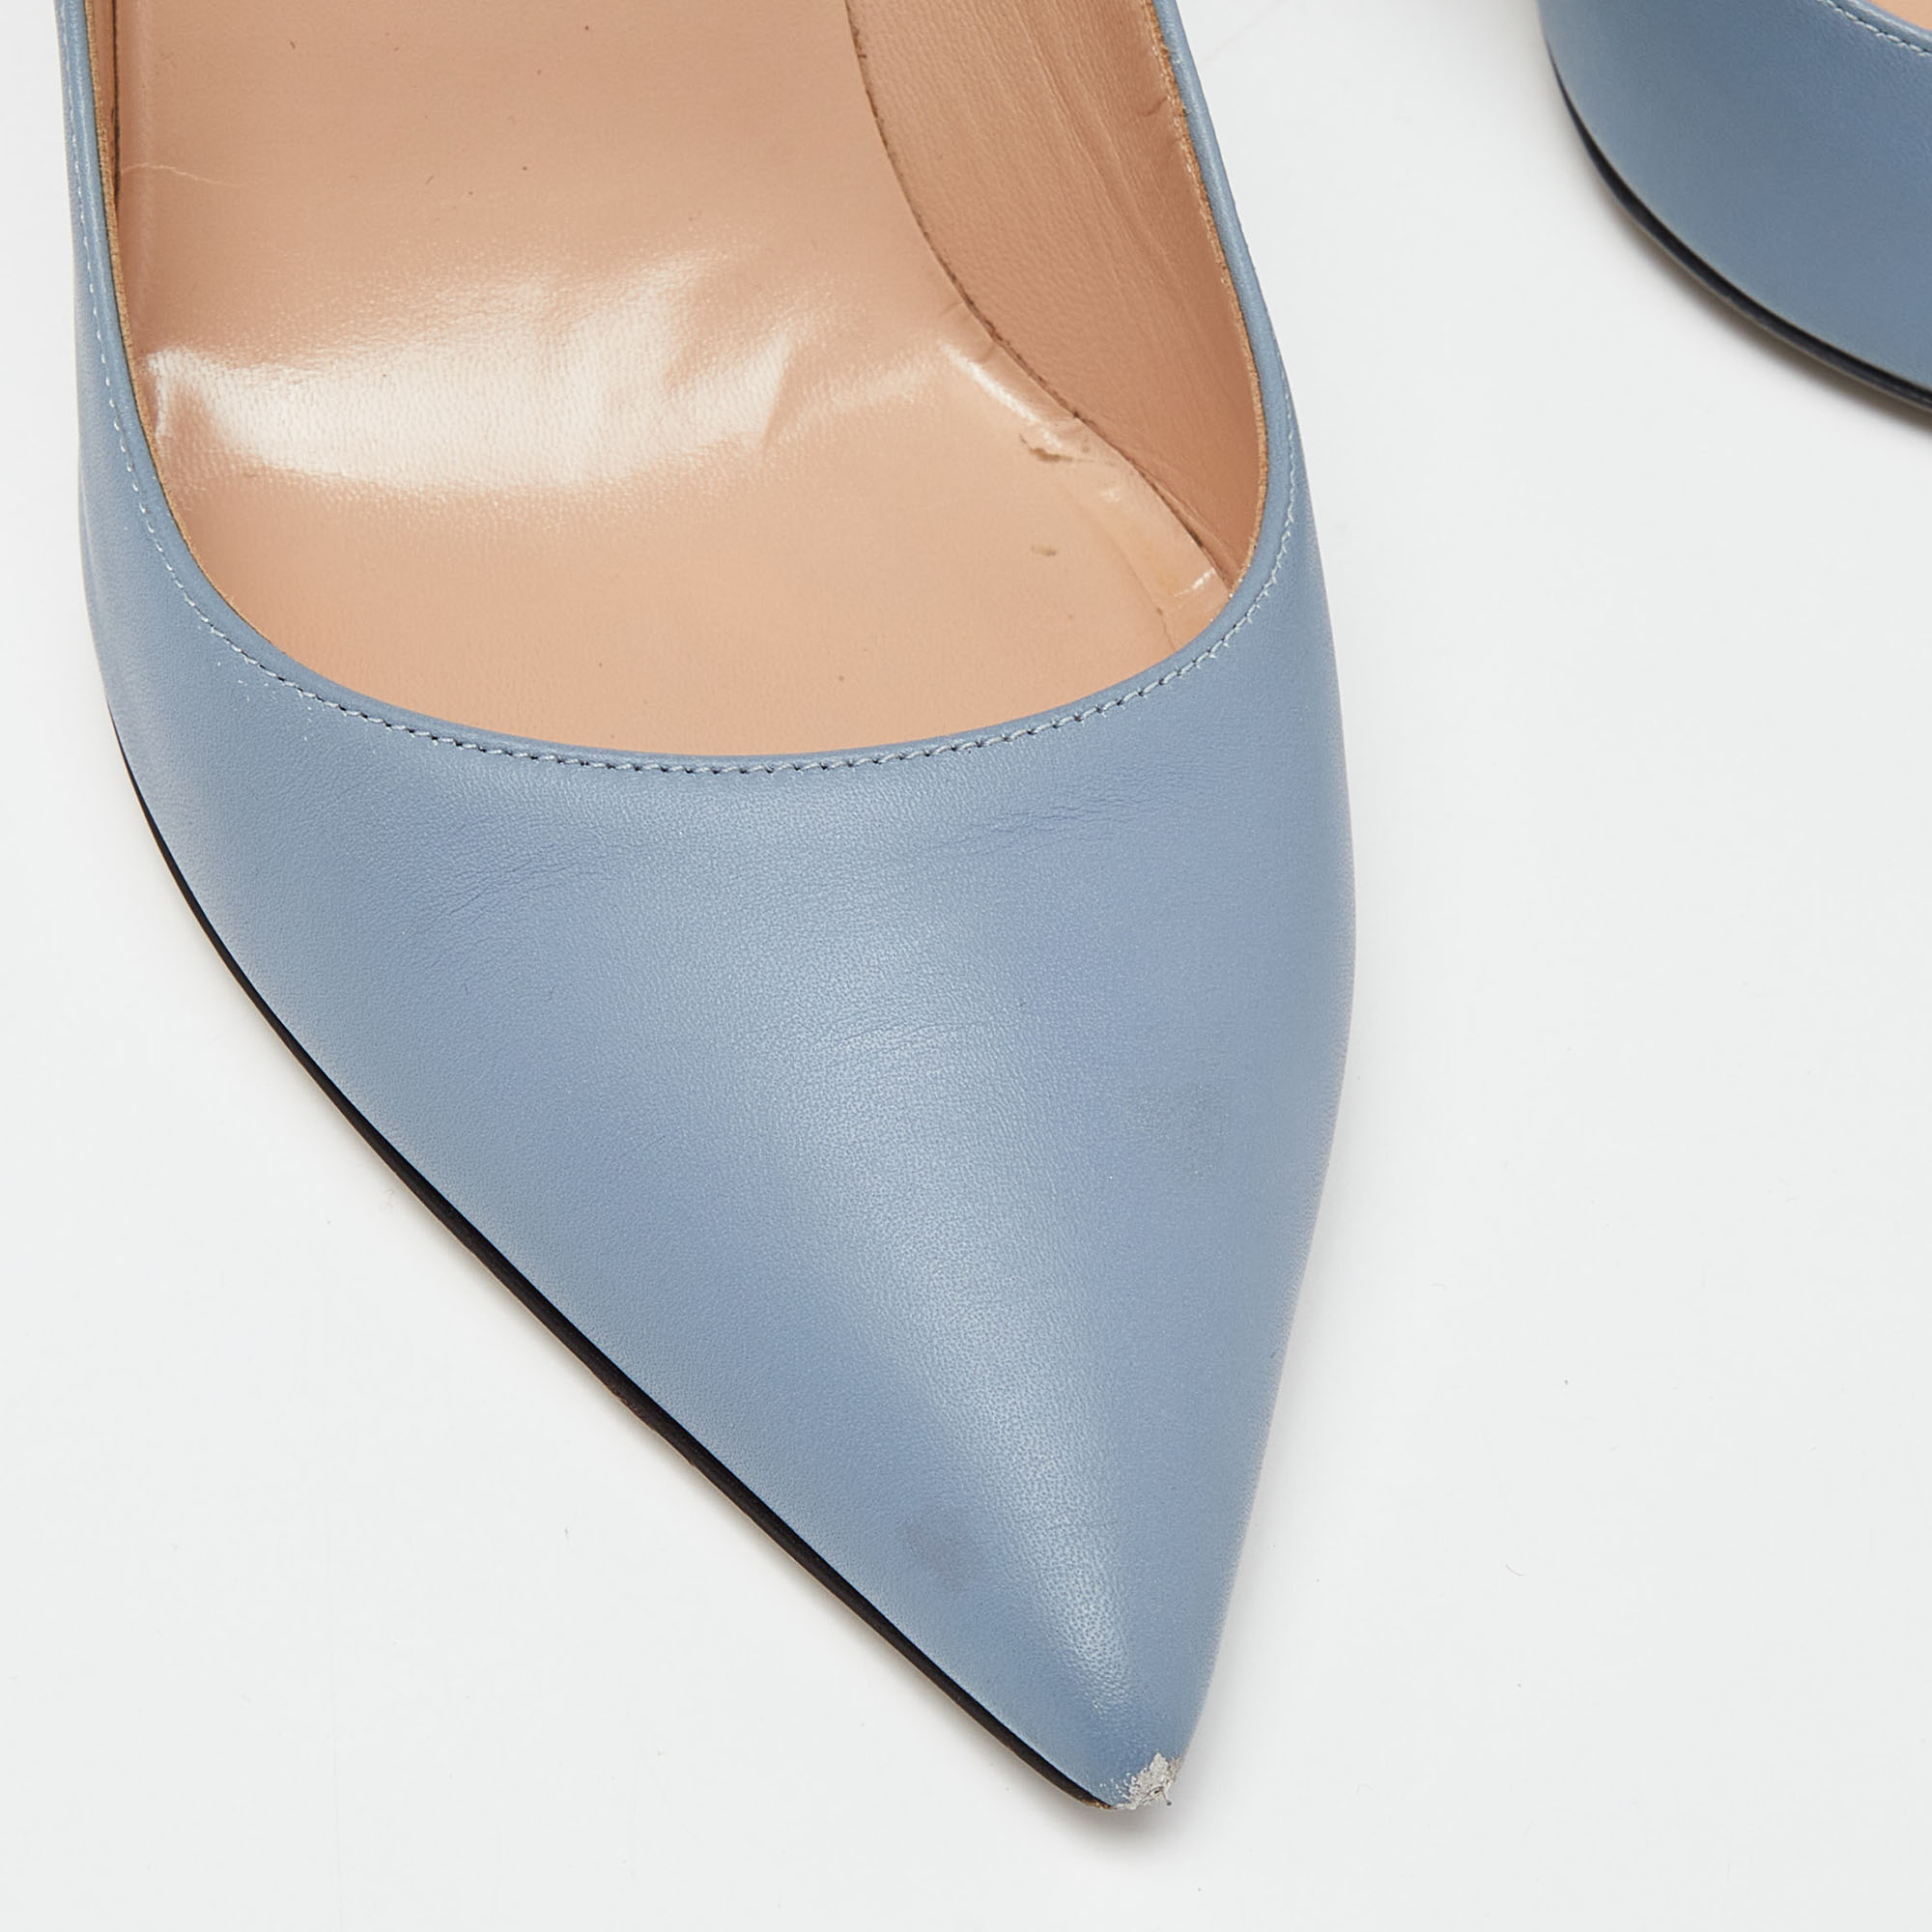 Valentino Blue Leather Pointed Toe Pumps Size 39.5